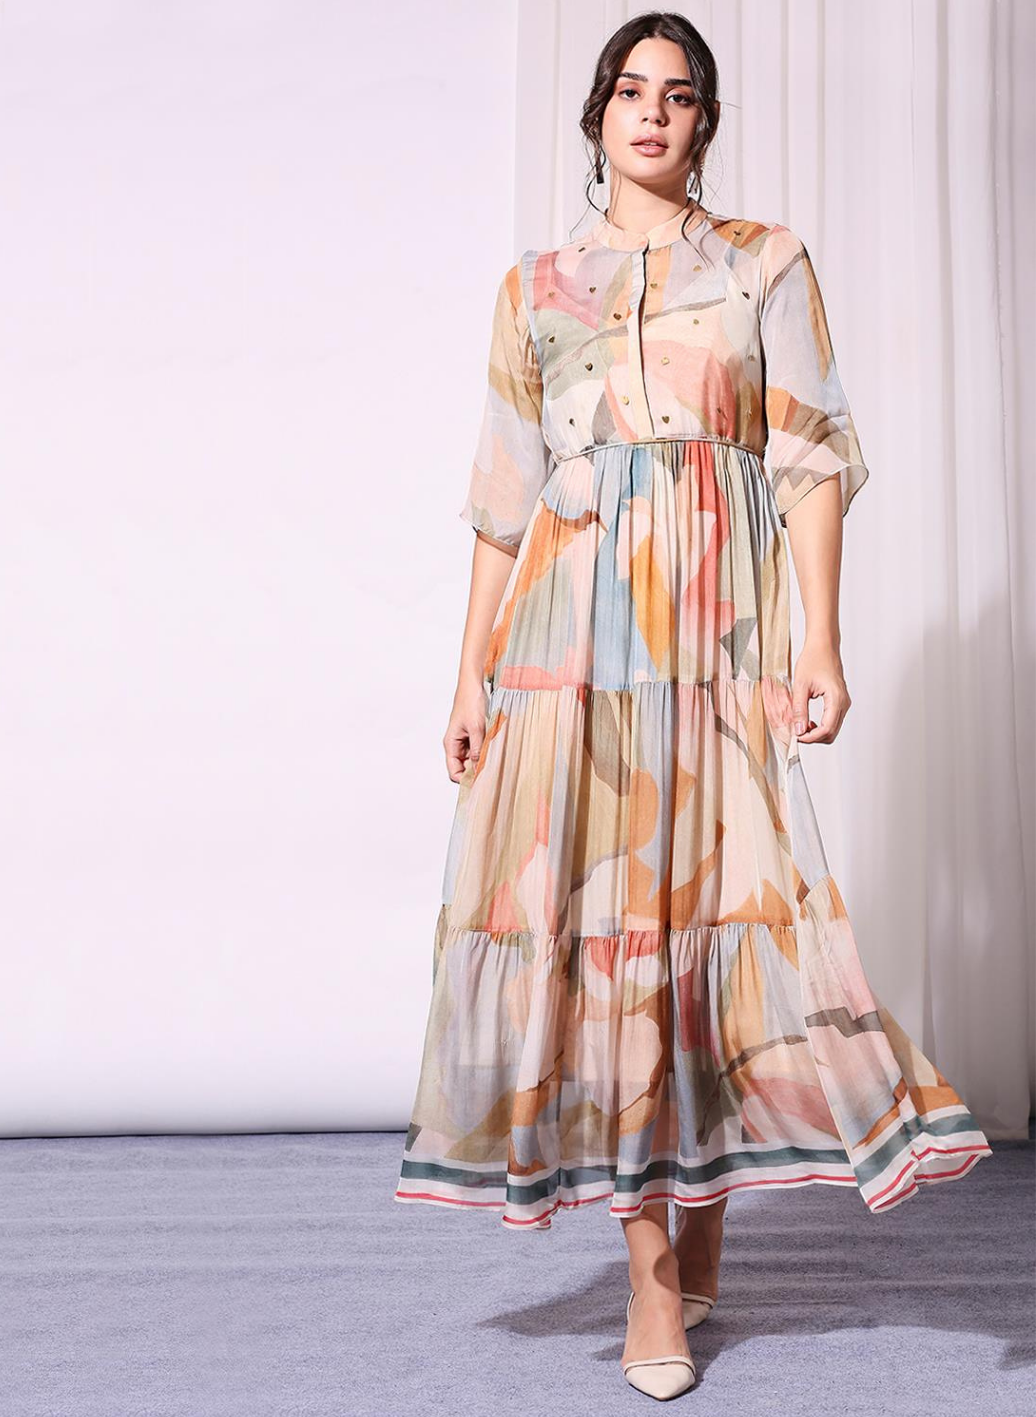 Image of ABSTRACT LONG DRESS. From savoirfashions.com